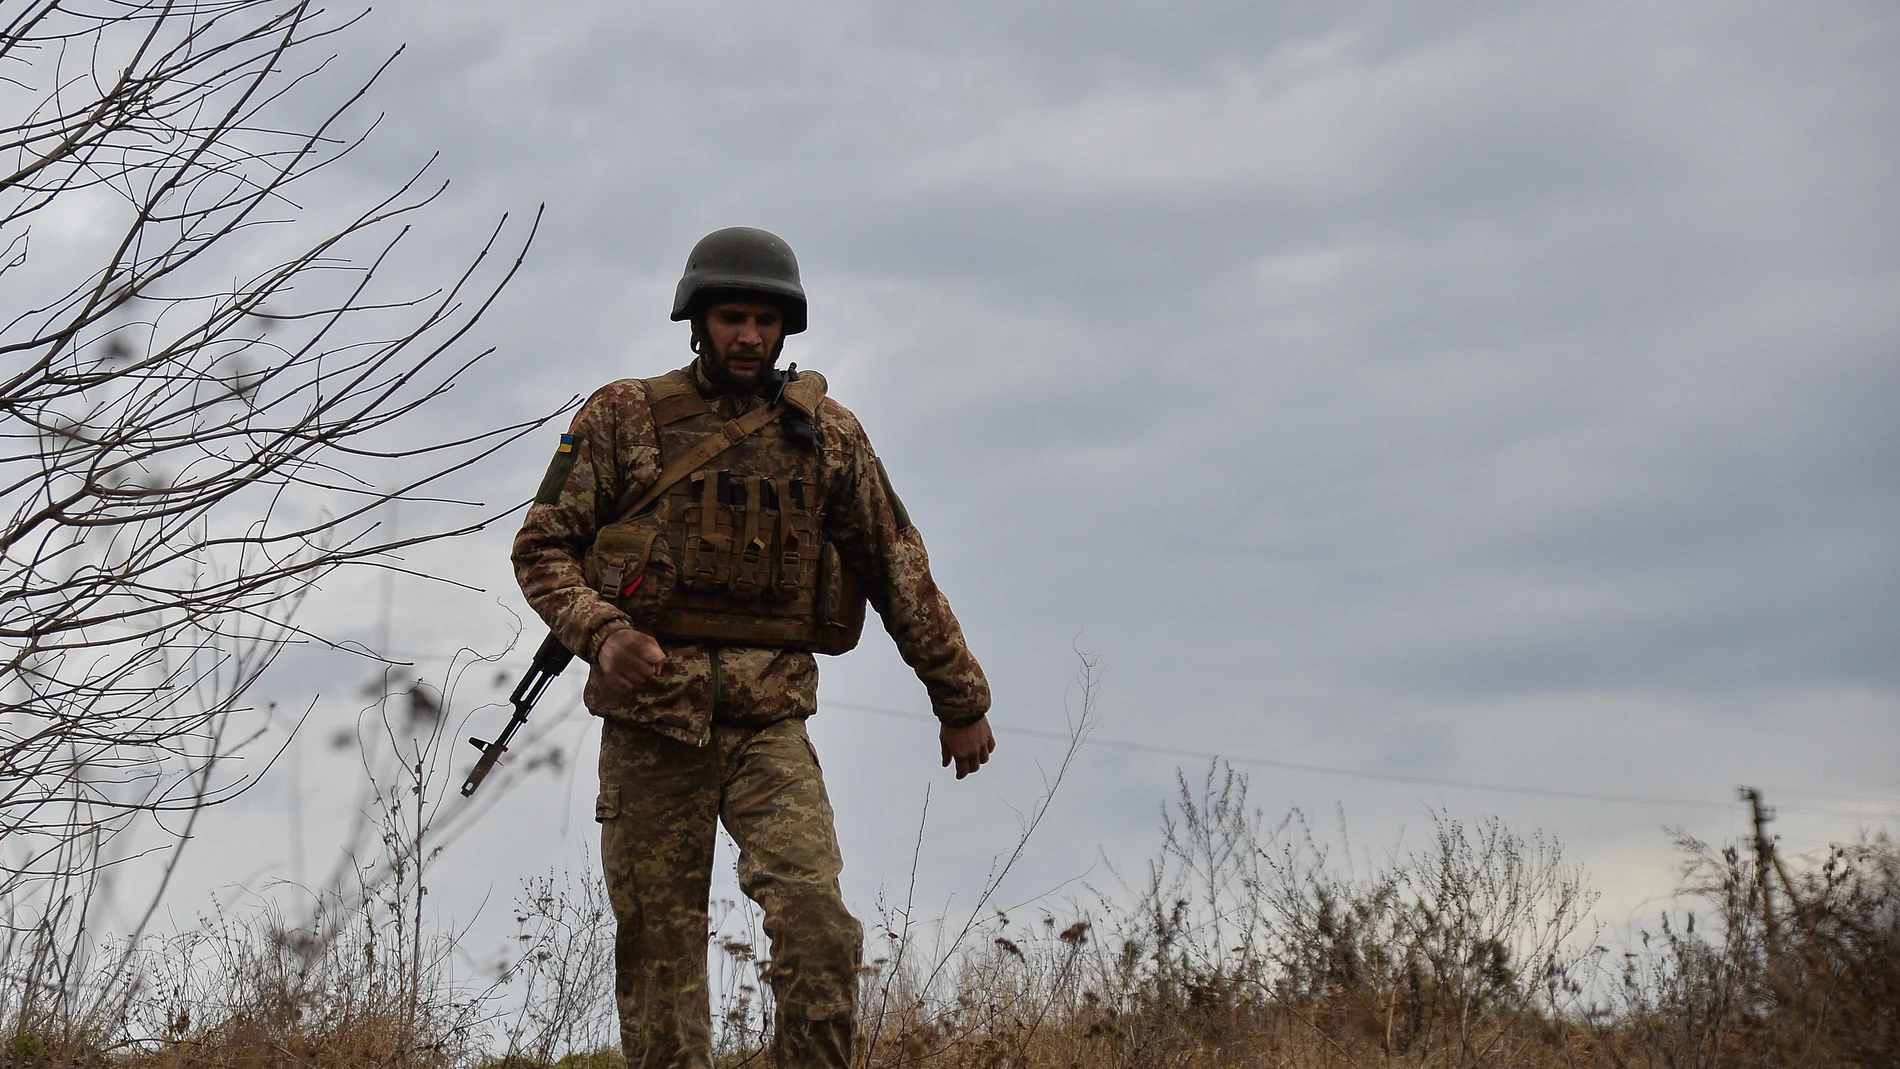 November 26, 2023, Kyiv, Donetsk, Ukraine: A Ukrainian soldier returns to his position following a completed fire mission. Soldiers with the 56th brigade continue to work in the Bakhmut region as winter approaches. 26/11/2023